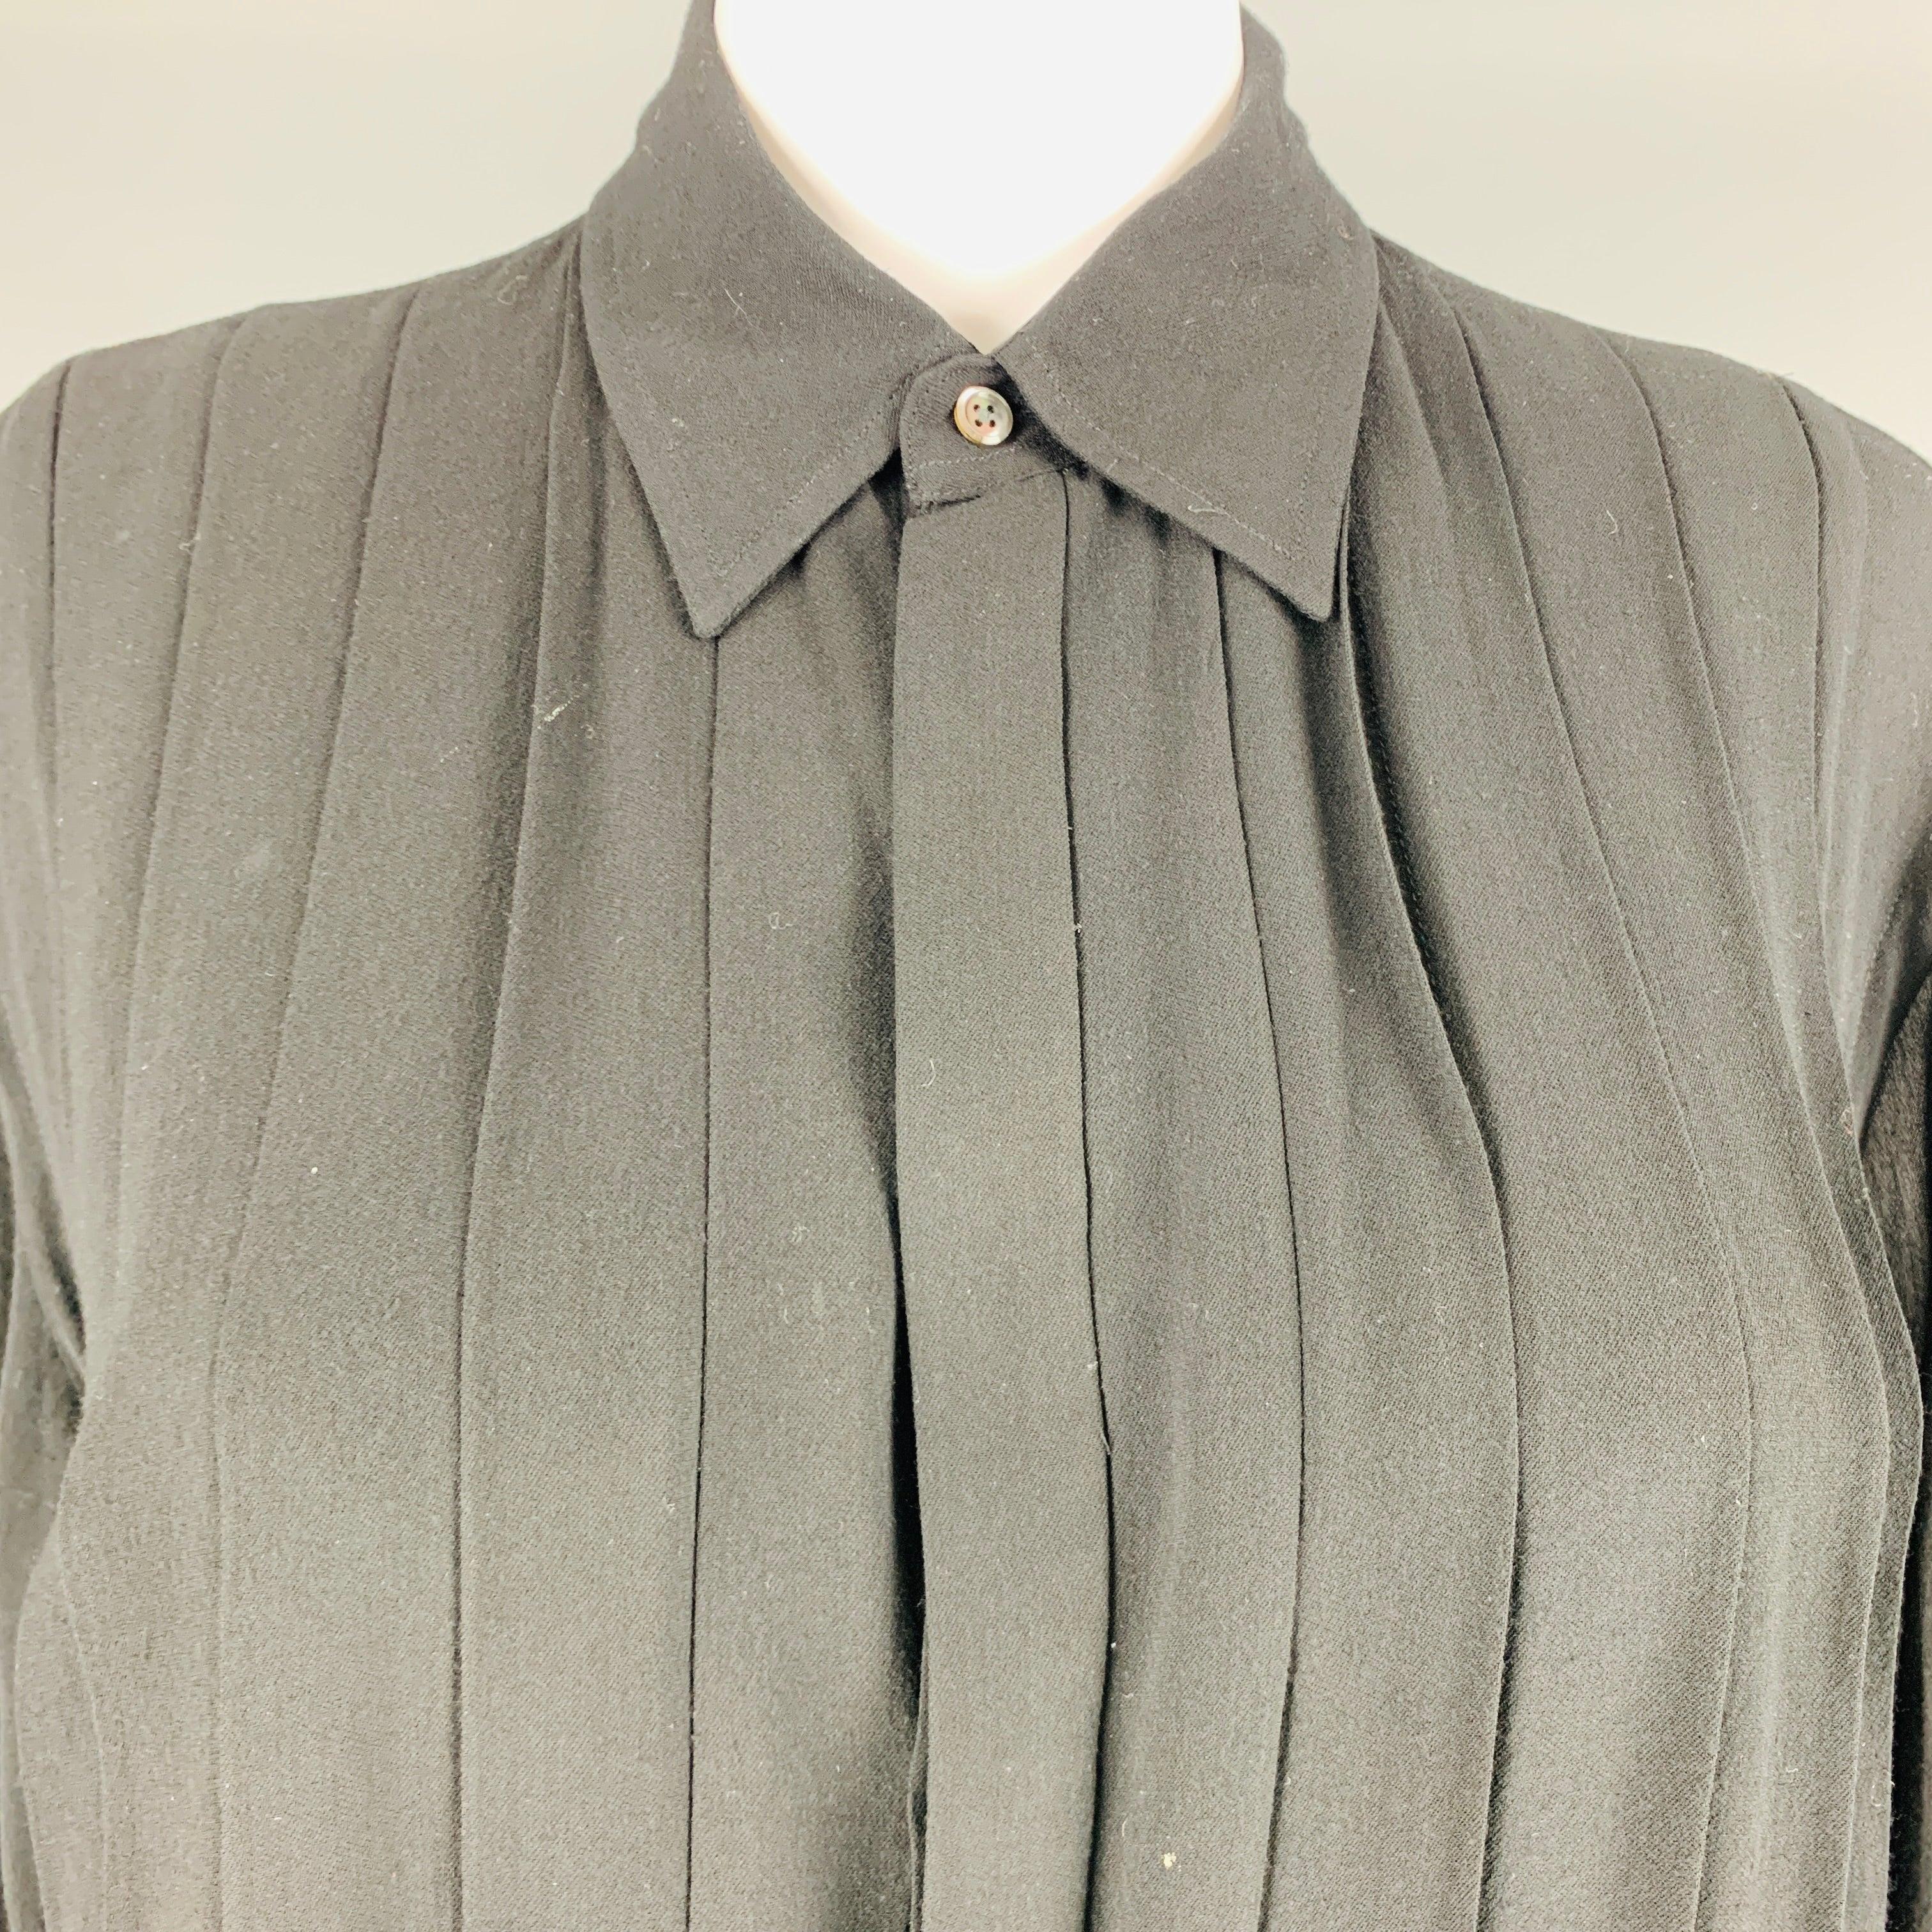 RALPH LAUREN long sleeves blouse comes in black viscose woven features a plated panel at front, hidden placket, straight collar, and button down closure. Excellent Pre- Owned Condition. 

Marked:   10 

Measurements: 
 
Shoulder: 18.5 inches Bust: